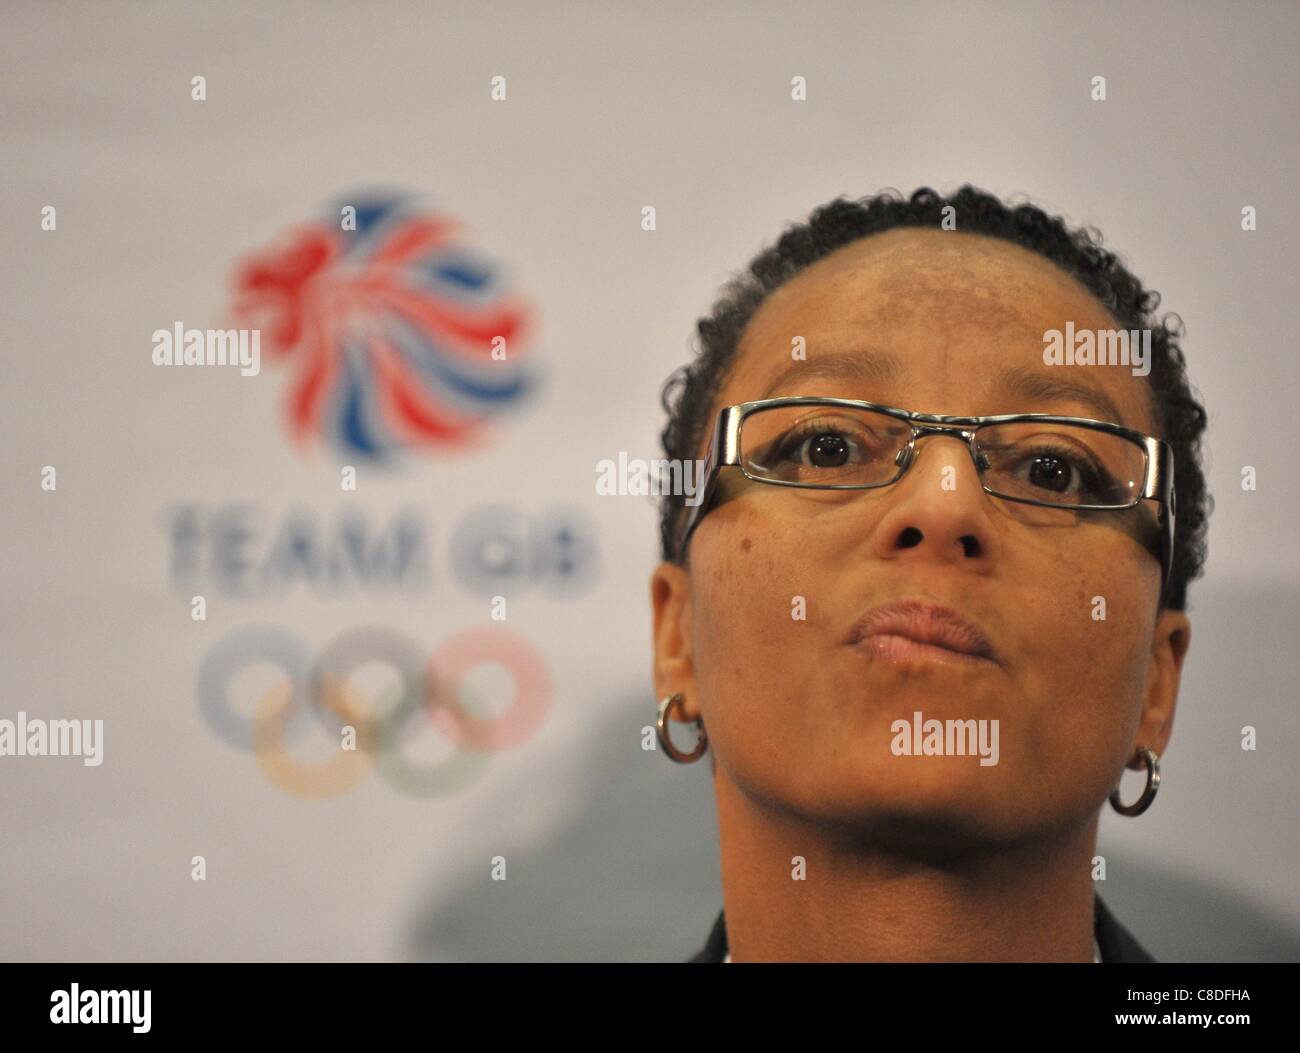 WEMBLEY STADIUM, LONDON, UK, Thursday 20/10/2011. Manger of the womens 2012 Olympic British football team Hope Powell. English Football Association (FA) press conference announcing Team GB mens and womens football team managers for London 2012 Olympics. Stock Photo